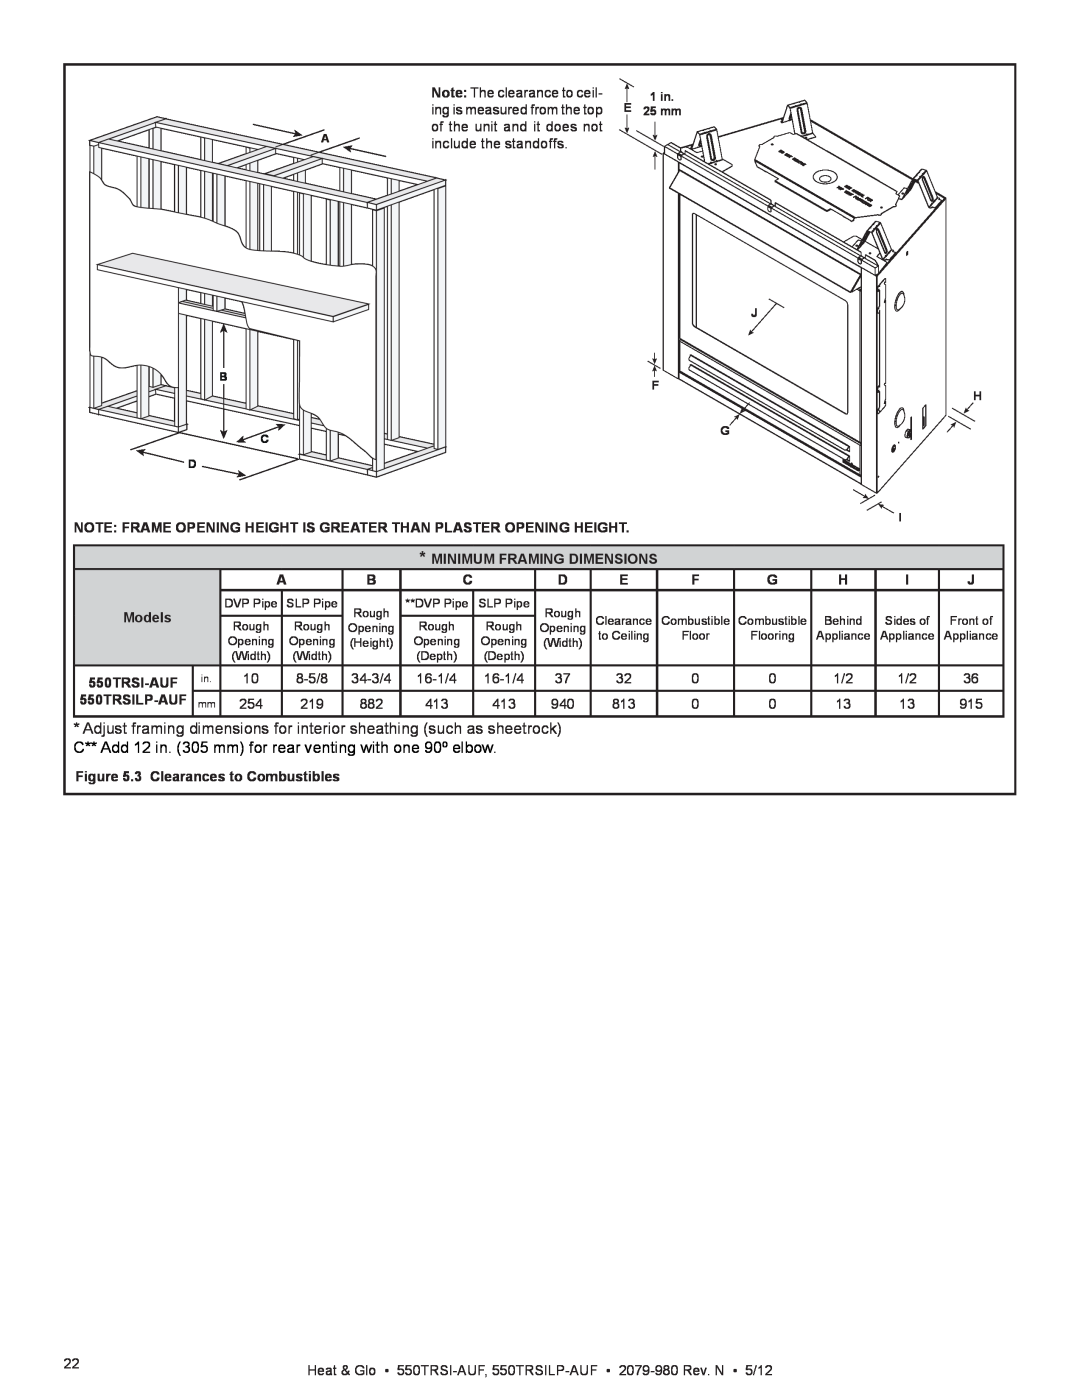 Heat & Glo LifeStyle 550TRSI-AUF Minimum Framing Dimensions, Models, 550TRSILP-AUF, 3 Clearances to Combustibles 